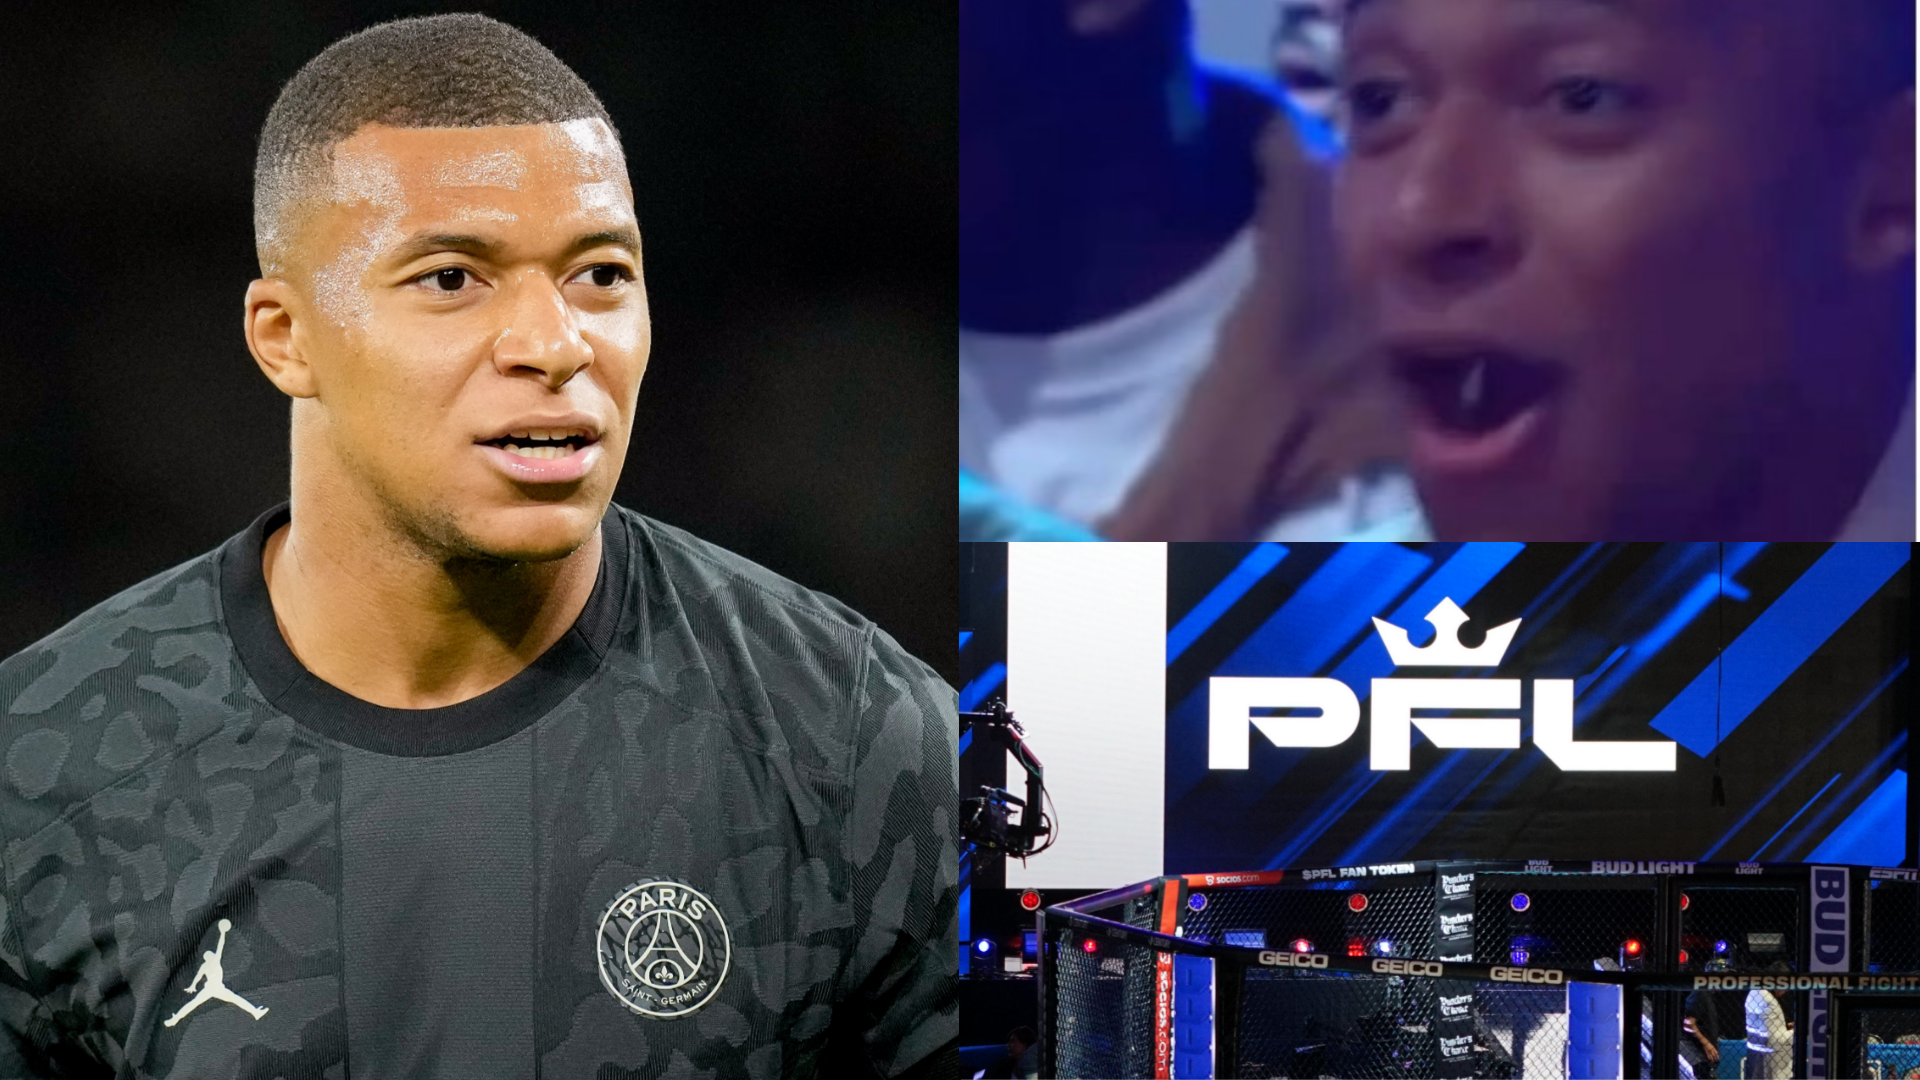 WATCH Stunning knockout punch leaves Kylian Mbappe gobsmacked as PSG superstar attends PFL Europe event with Ousmane Dembele and Achraf Hakimi Goal US